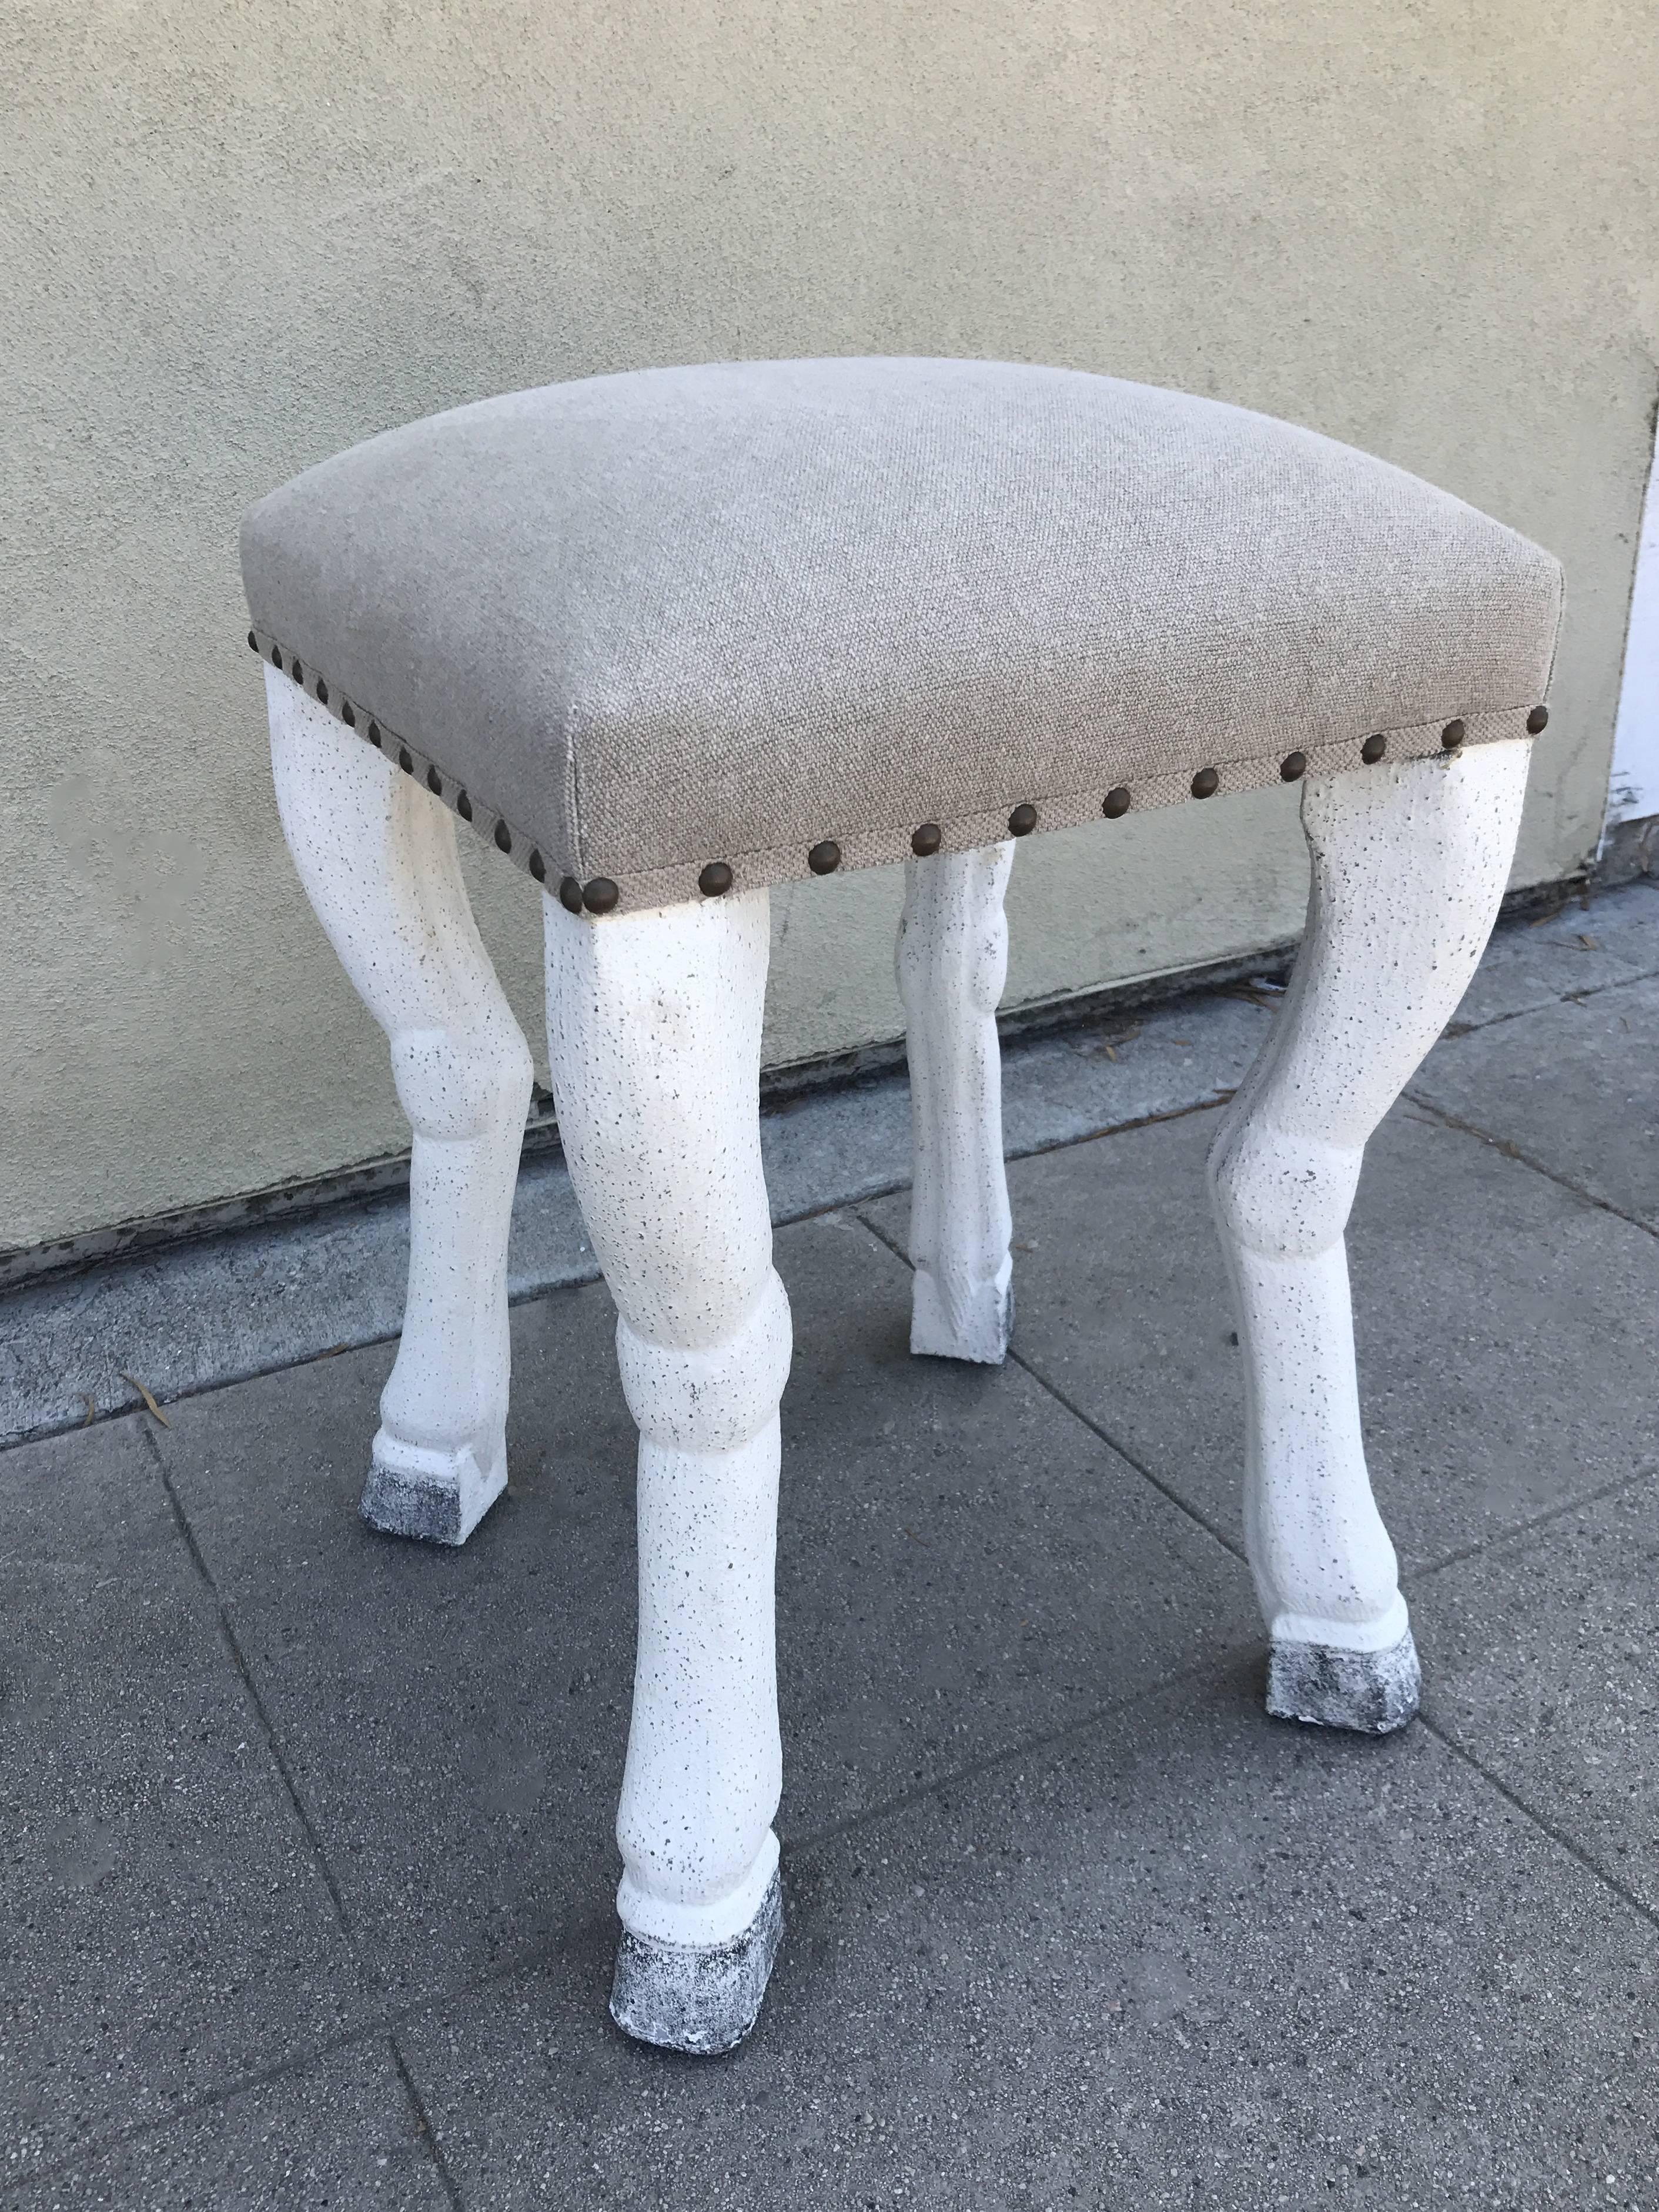 Mid-Century Modern Beige Upholstered Stool with Zoomorphic Legs after John Dickinson